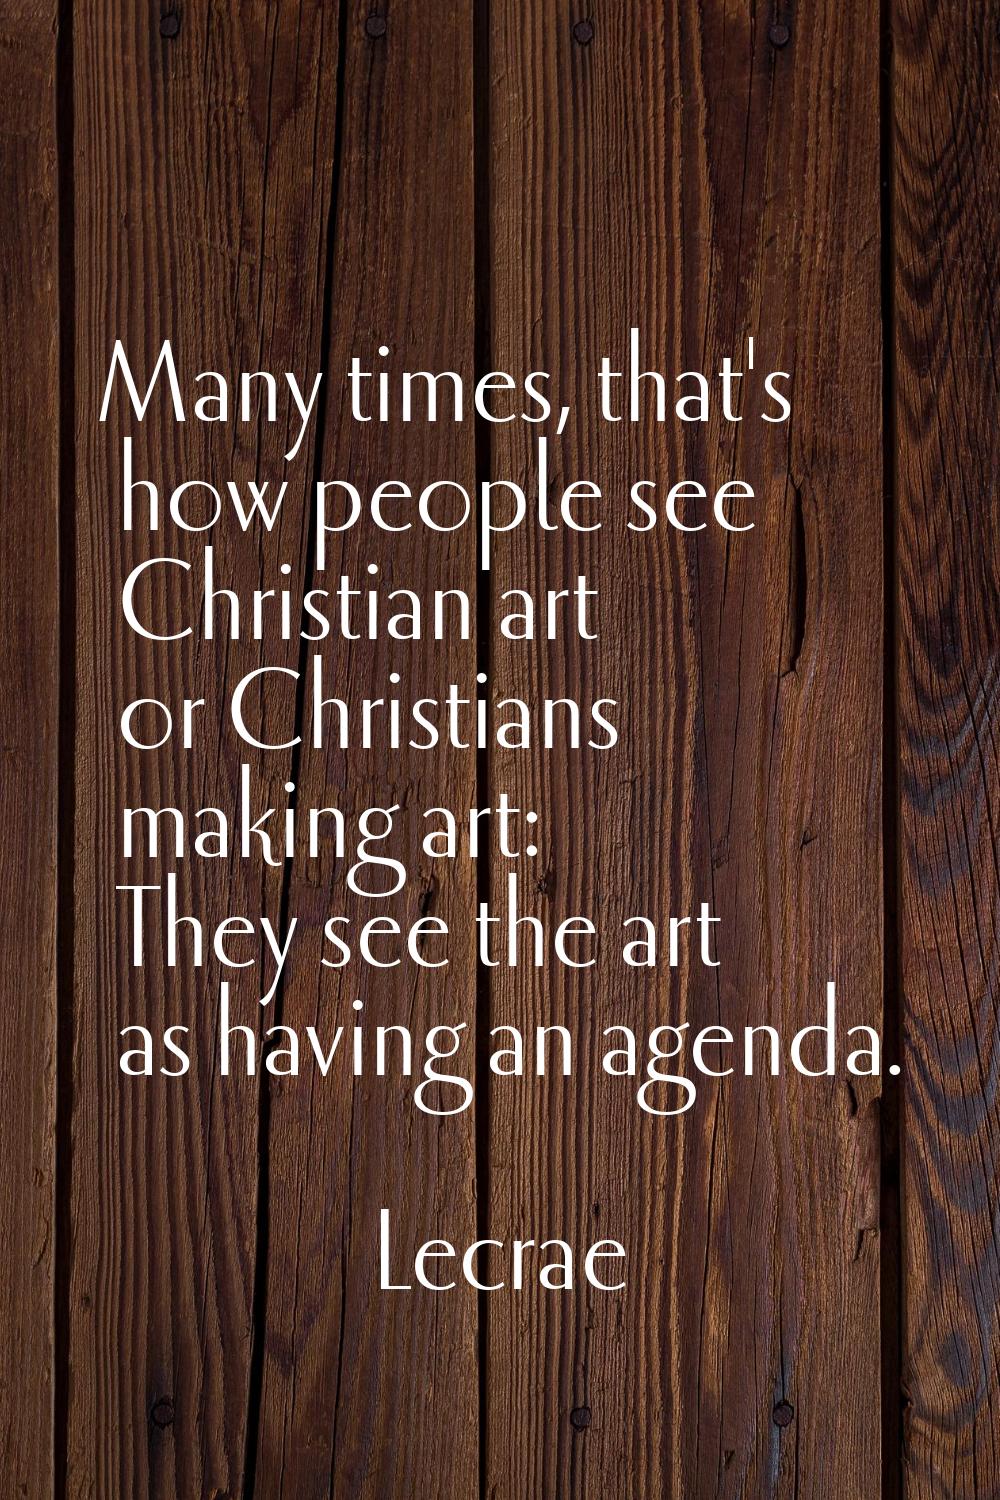 Many times, that's how people see Christian art or Christians making art: They see the art as havin